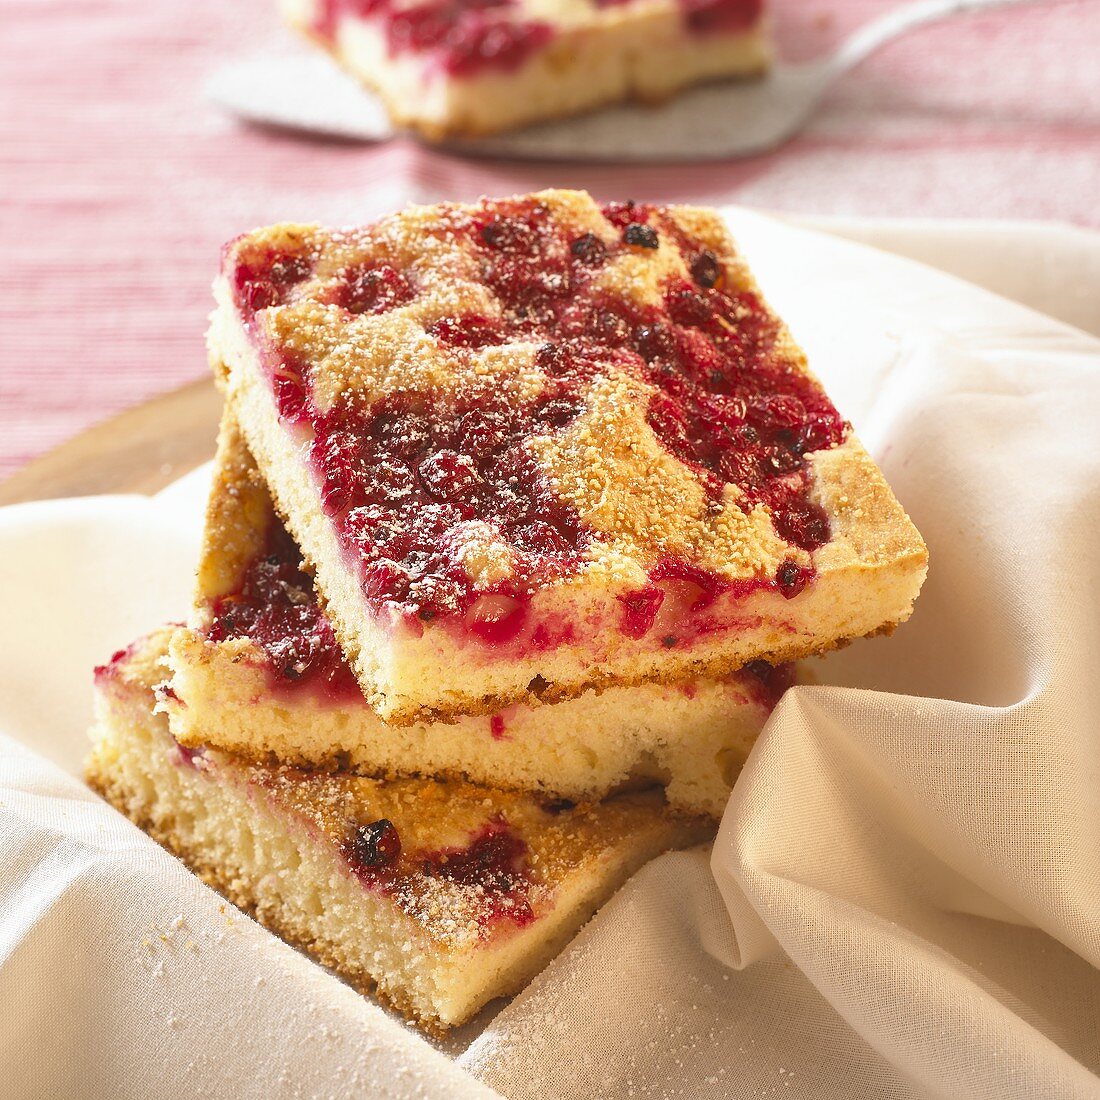 Several pieces of redcurrant cake